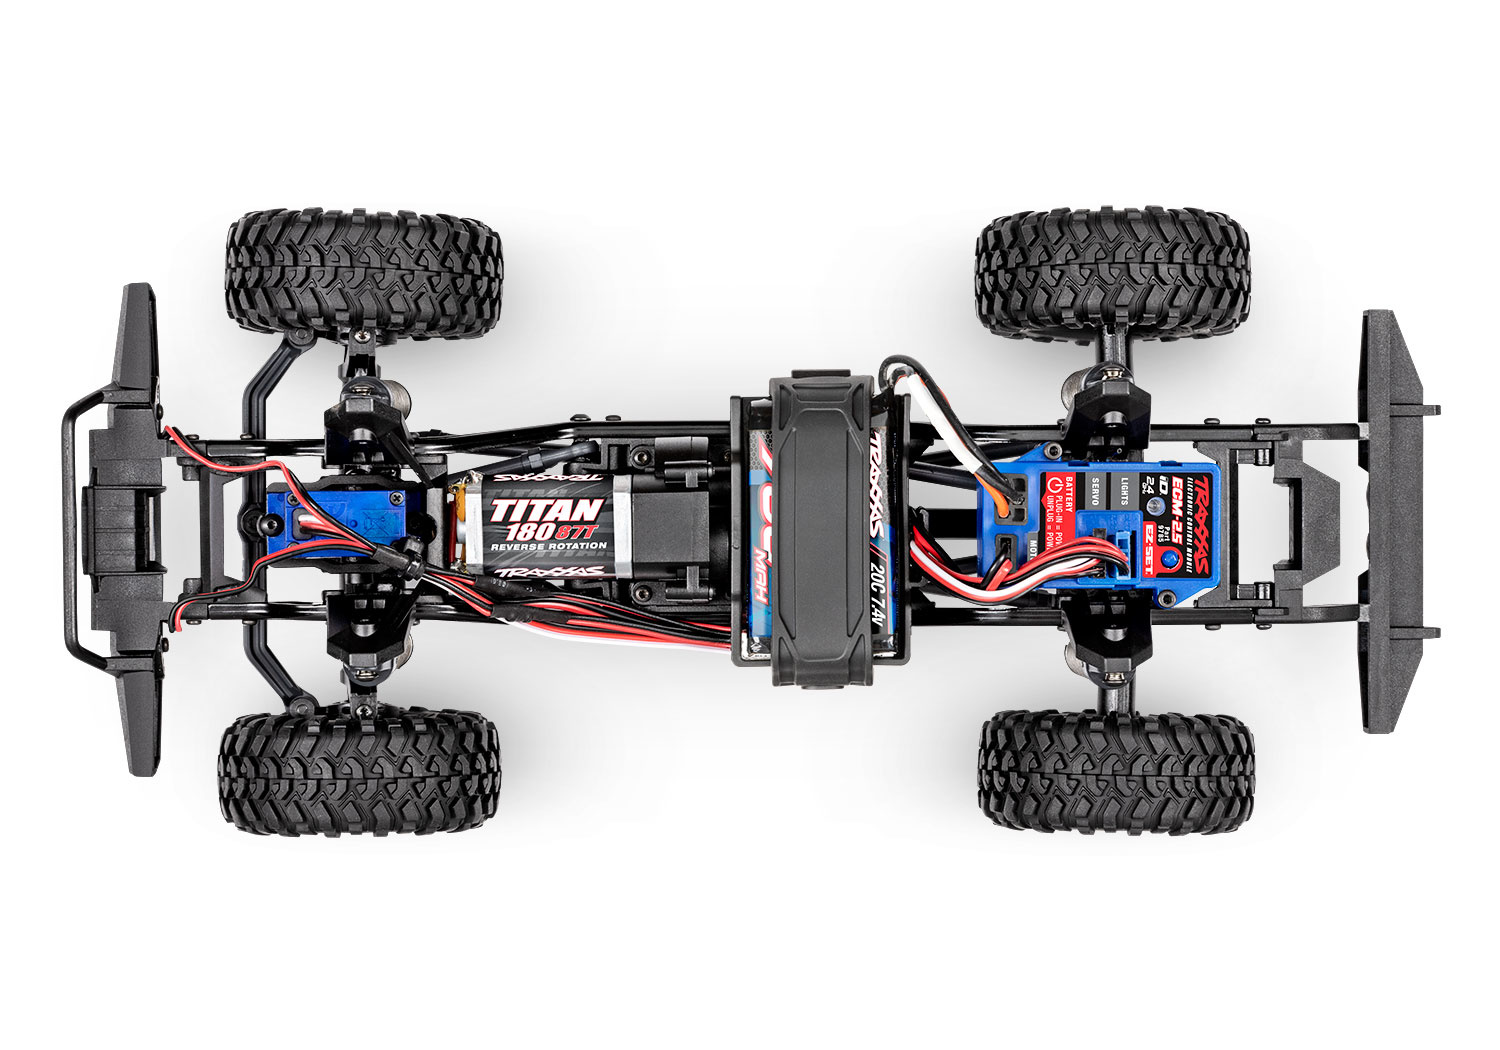 TRA97054-1 Blue Traxxas TRX-4M 1/18 4WD Land Rover Defender Scale 